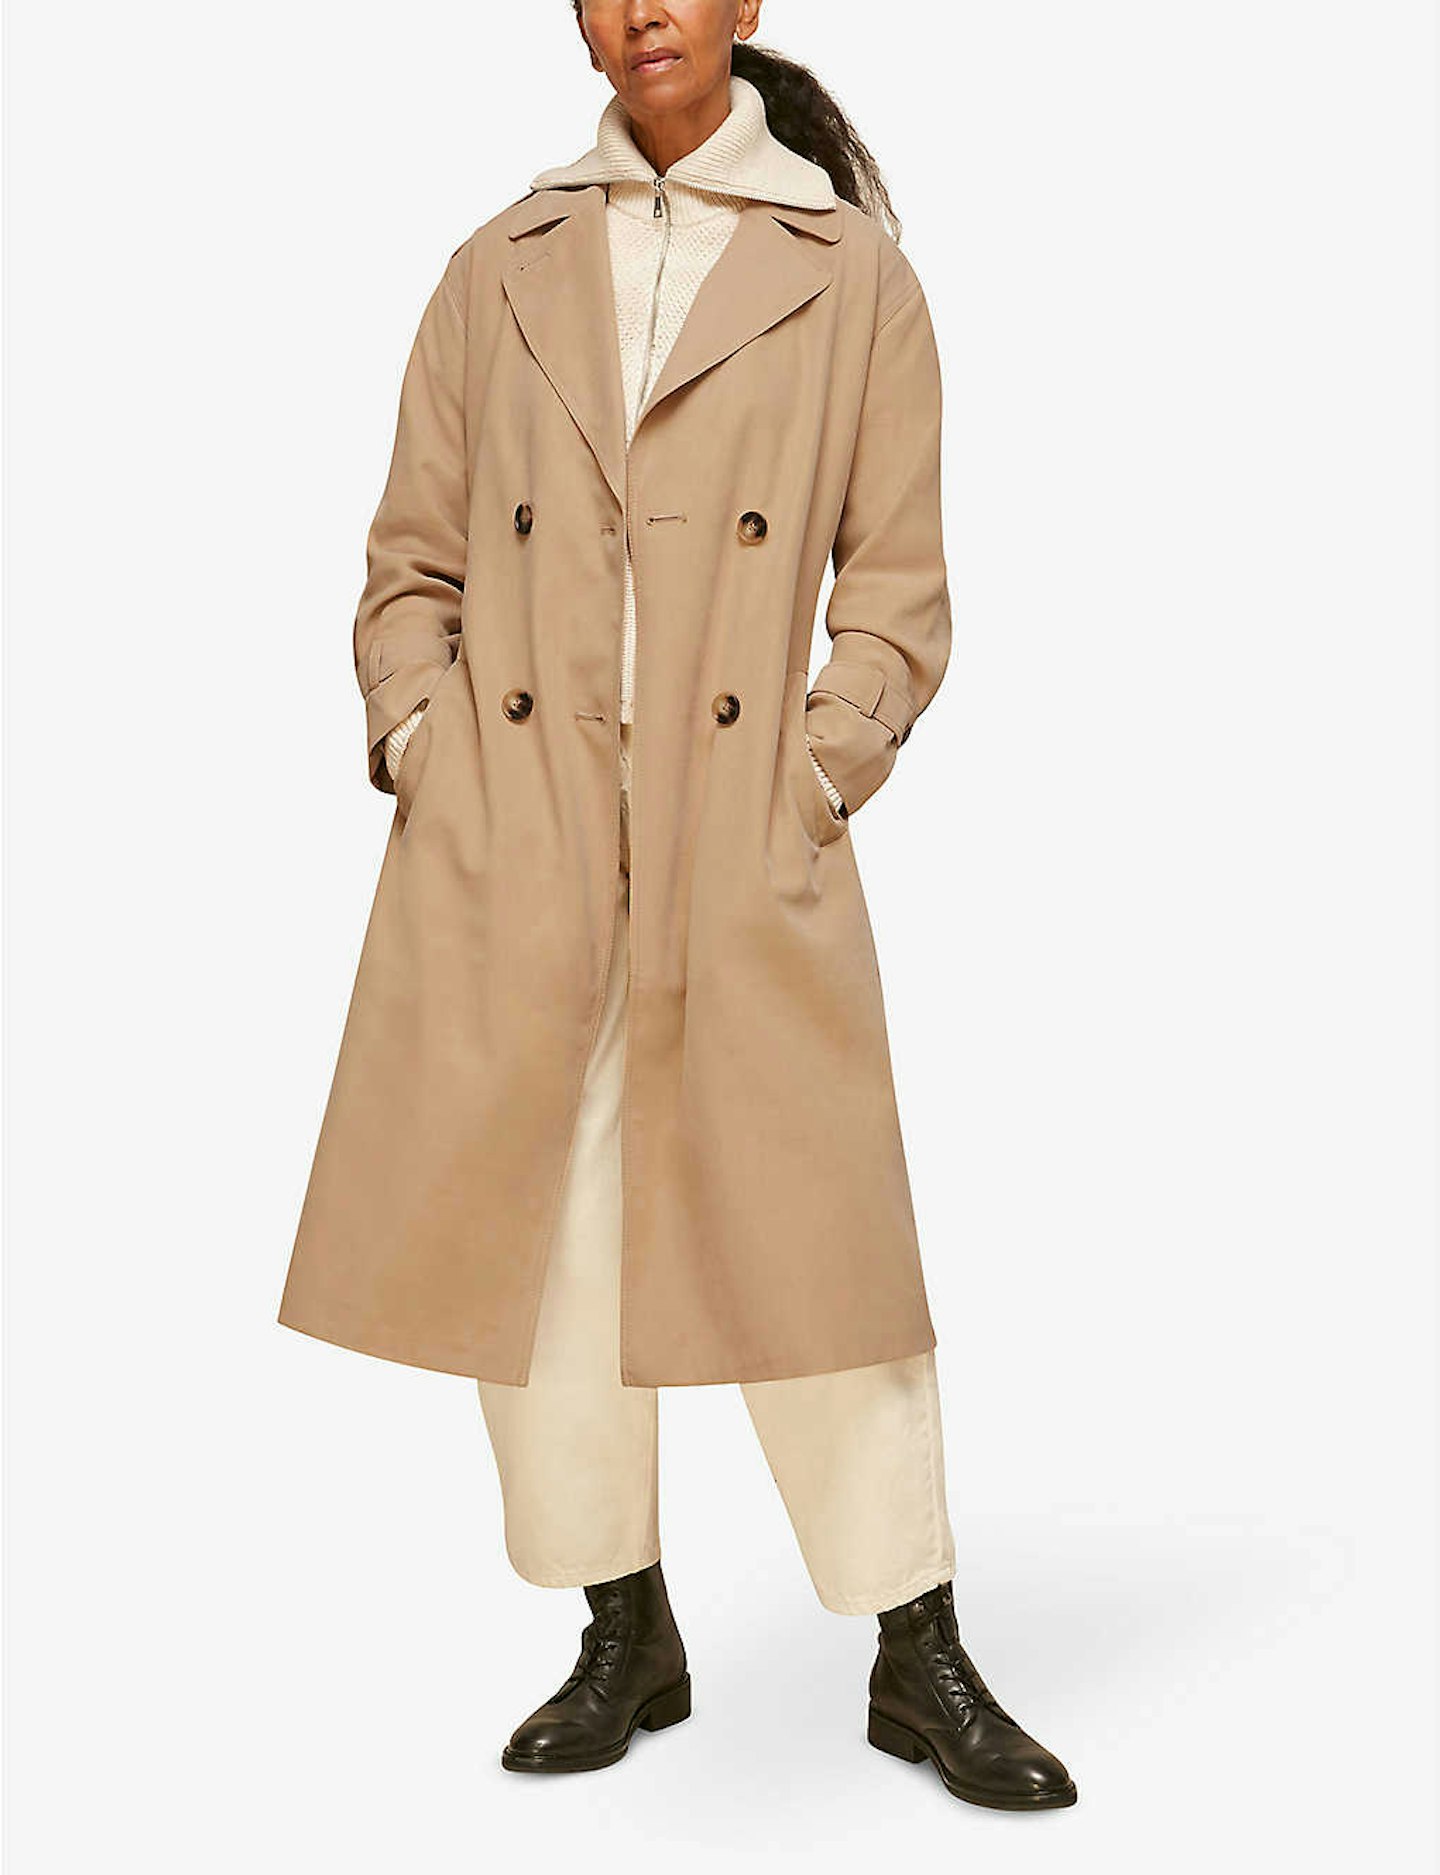 best trench coats for women Whistles, Riley Woven Double Breasted Trench Coat, £199